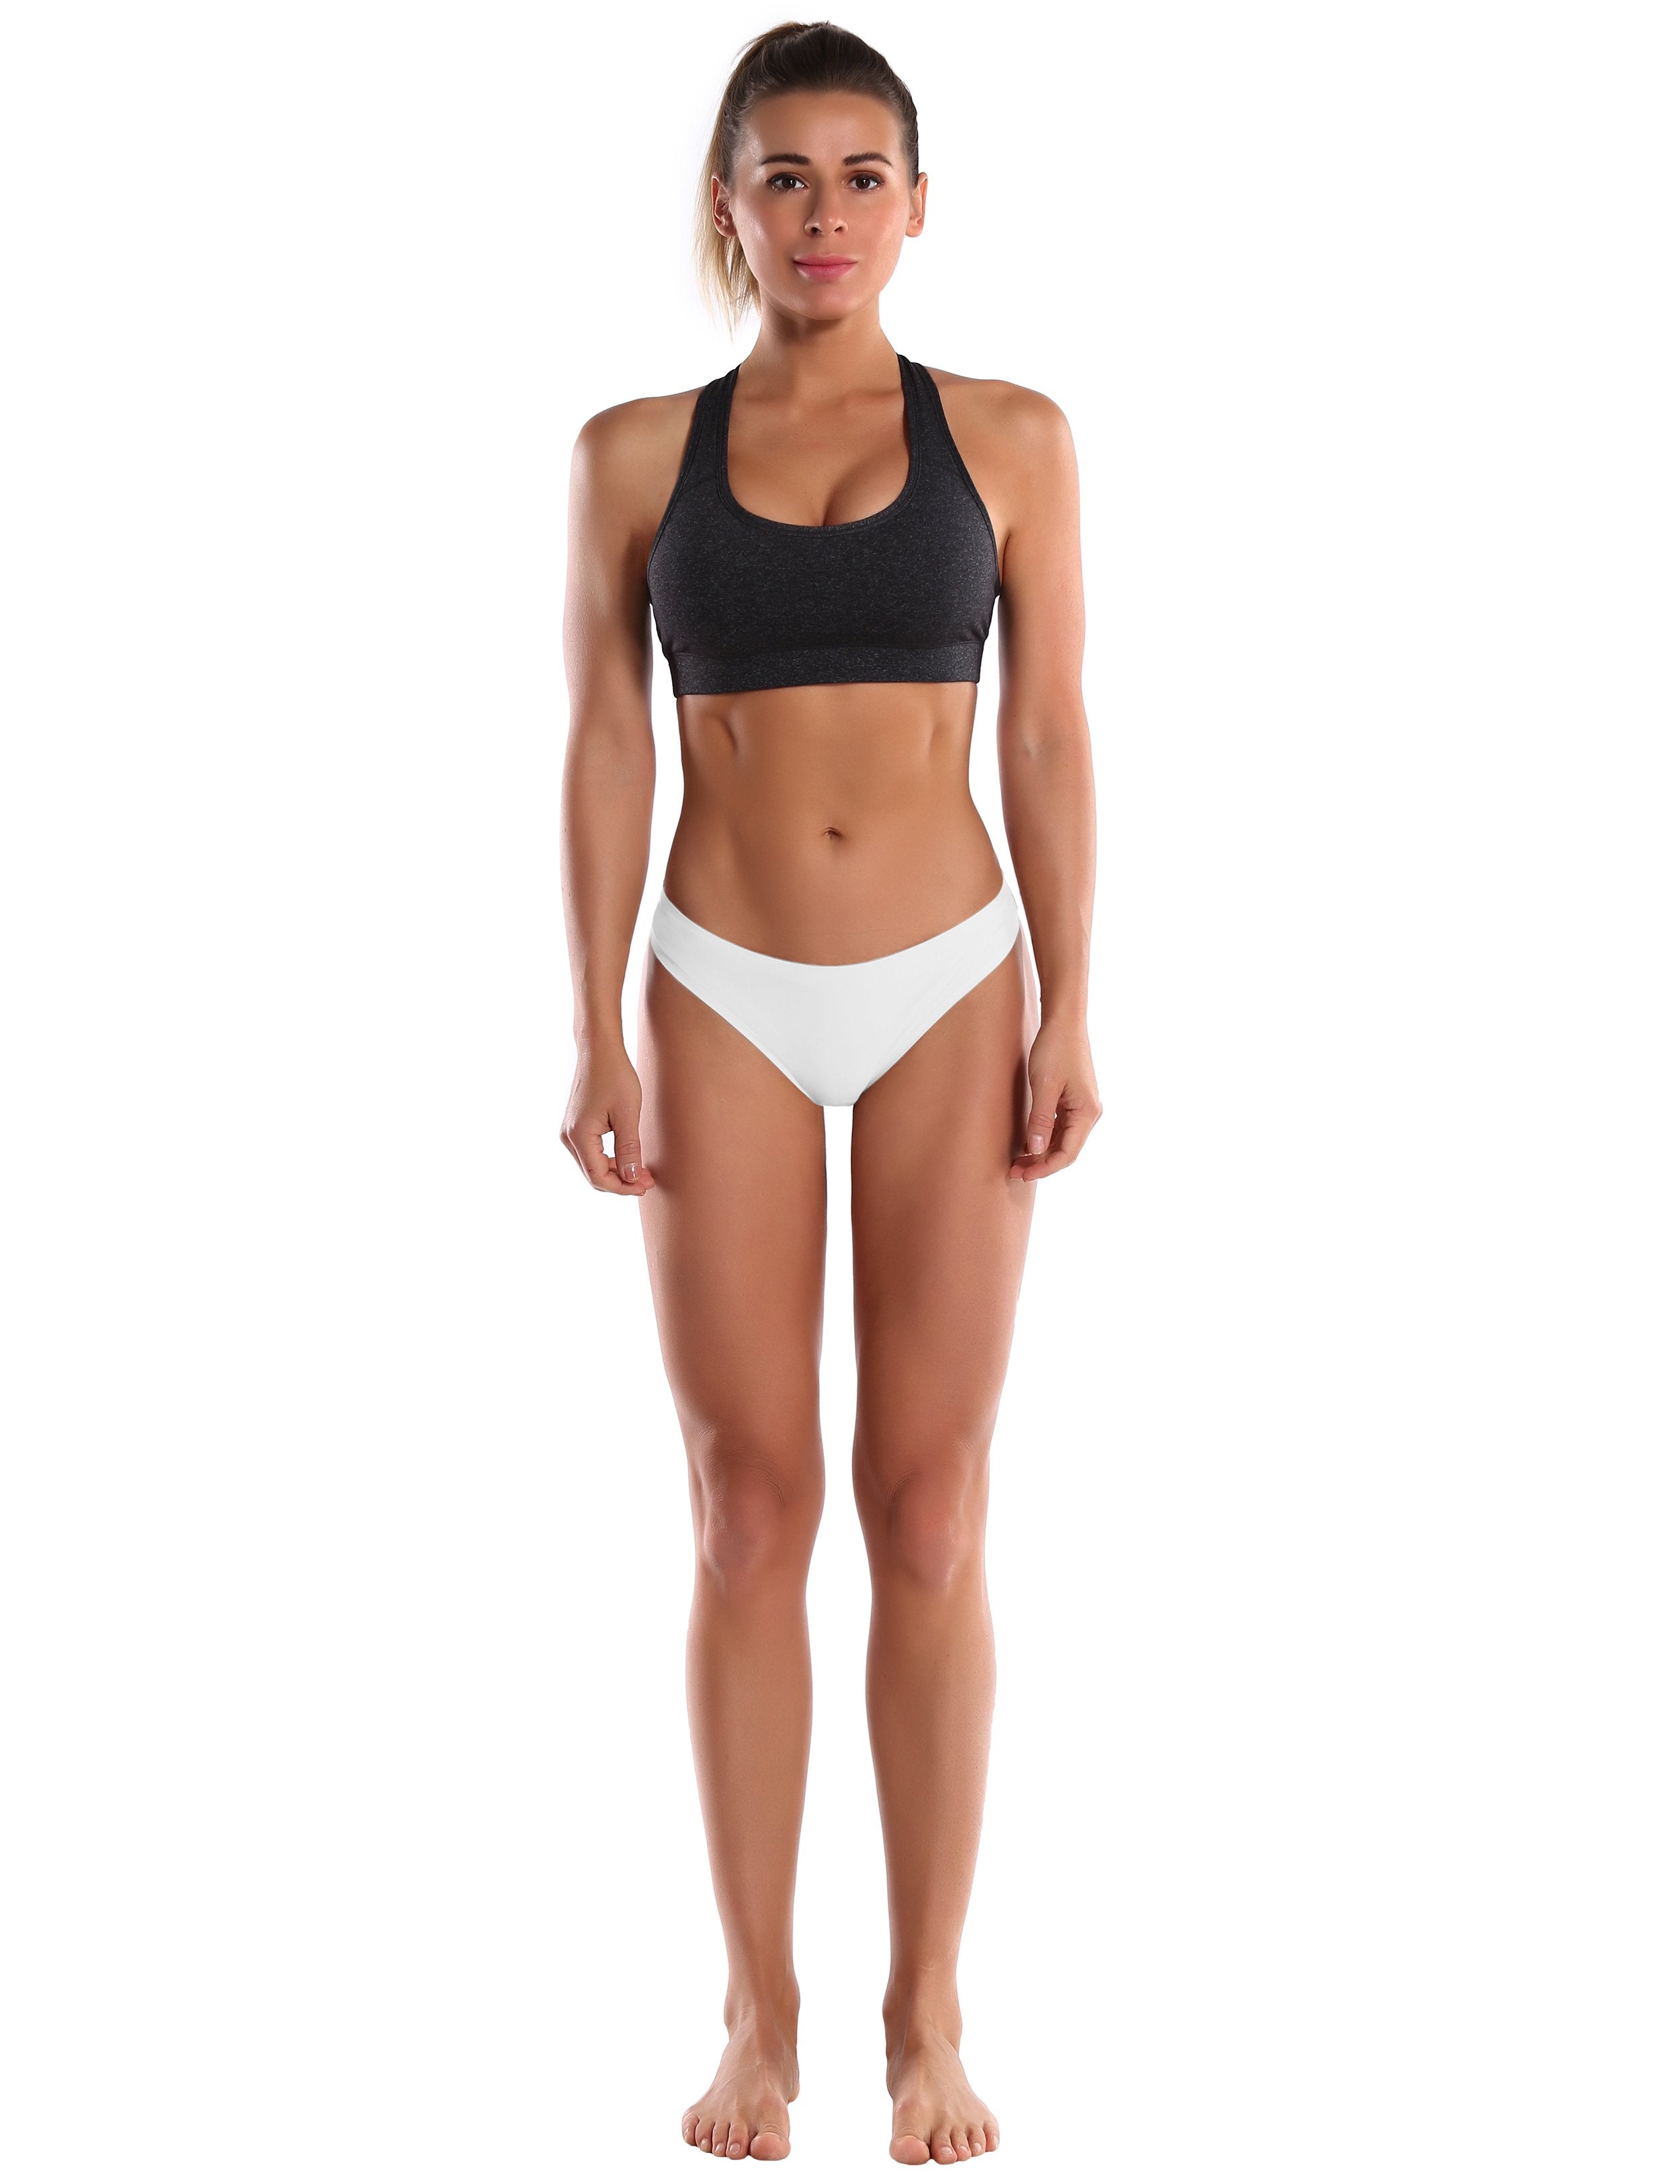 Invisibles Sport Thongs White Sleek, soft, smooth and totally comfortable: our newest thongs style is here. High elasticity High density Softest-ever fabric Laser cutting Unsealed Comfortable No panty lines Machine wash 95% Nylon, 5% Spandex